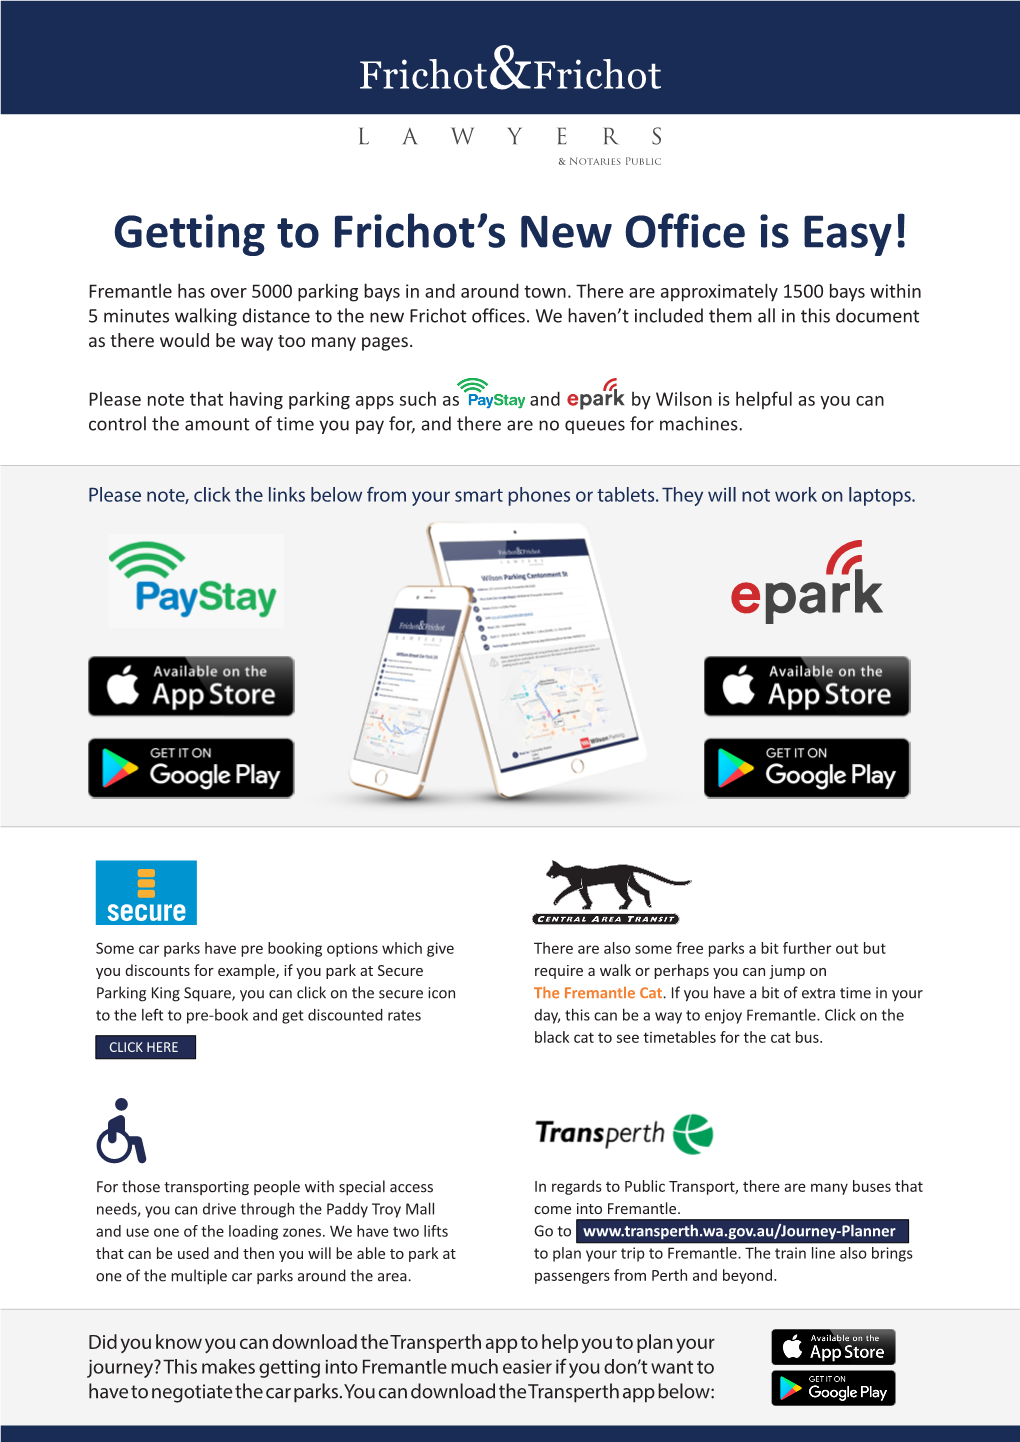 Getting to Frichot's New Office Is Easy!